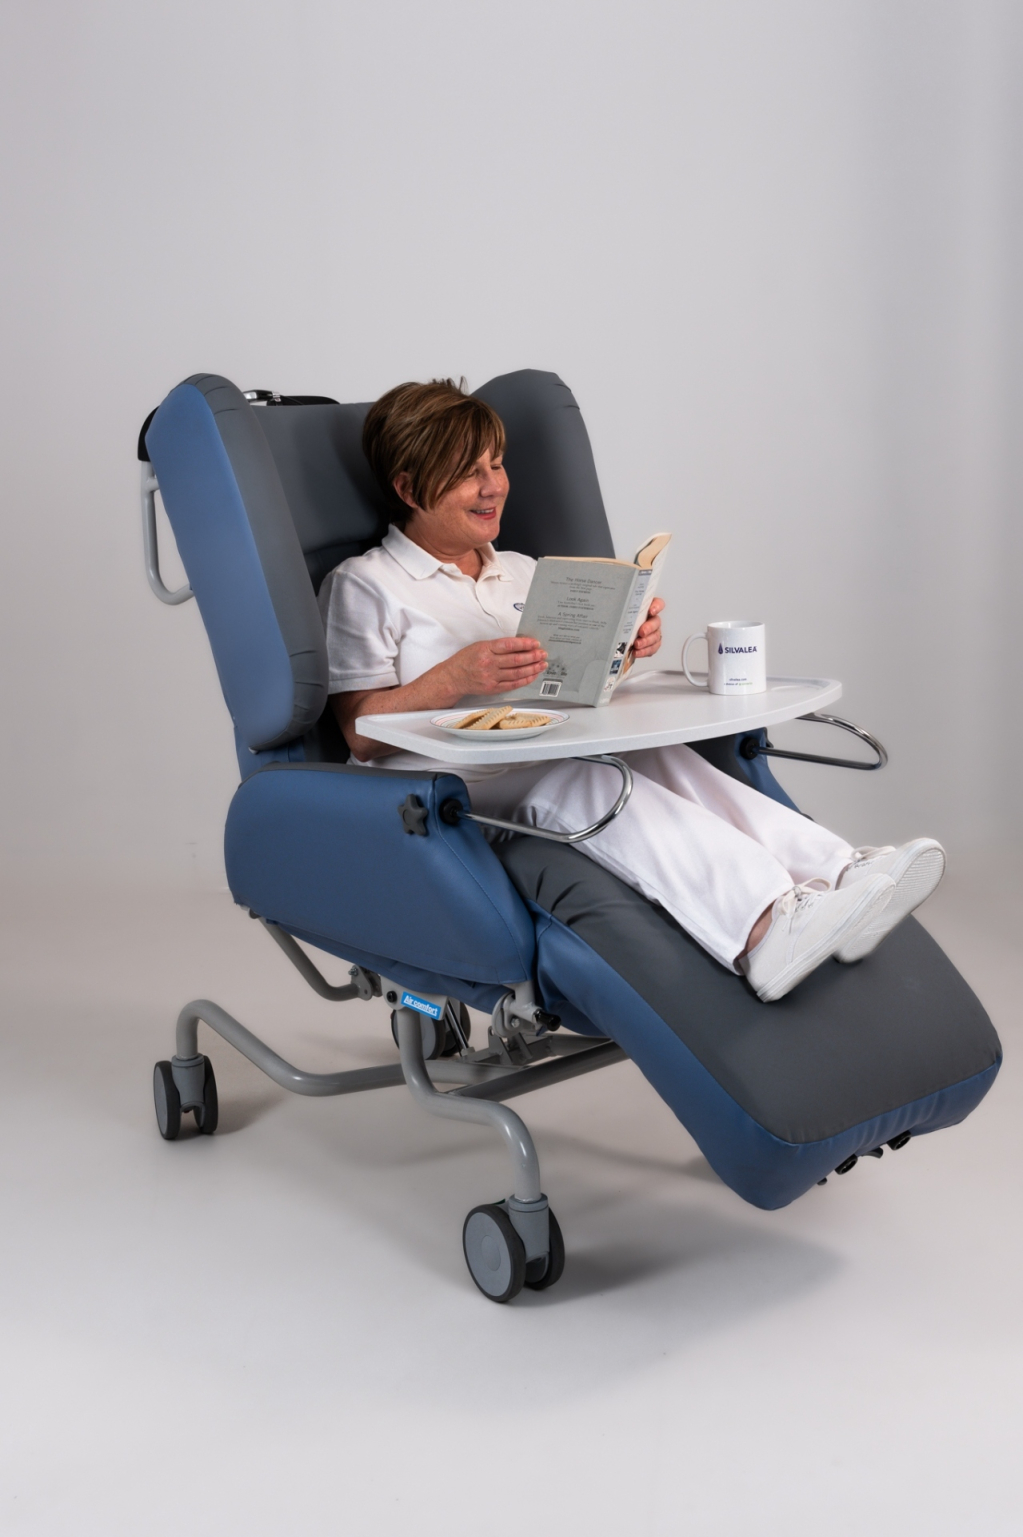 Meal Tray for Air Comfort Deluxe V2 Chair